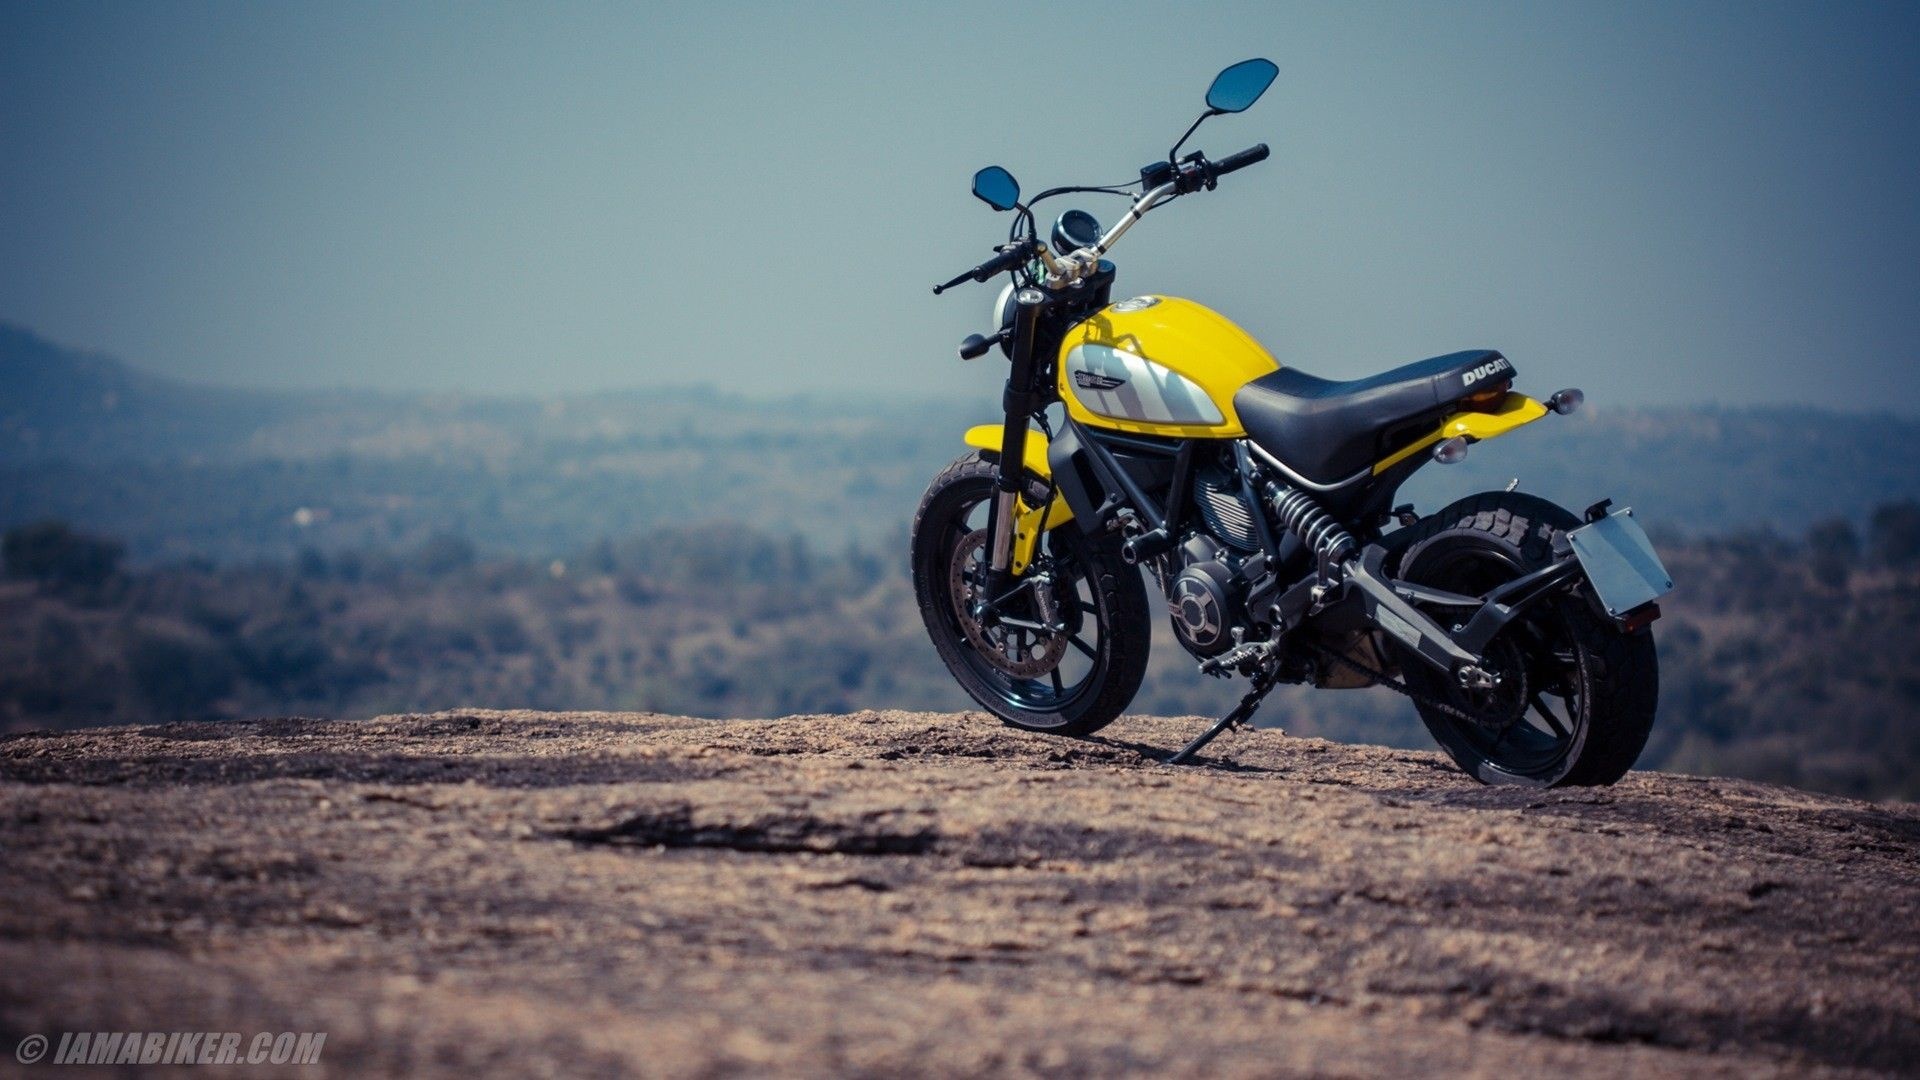 Ducati Scrambler Icon, Iconic motorcycle, Stunning wallpapers, Free backgrounds, 1920x1080 Full HD Desktop